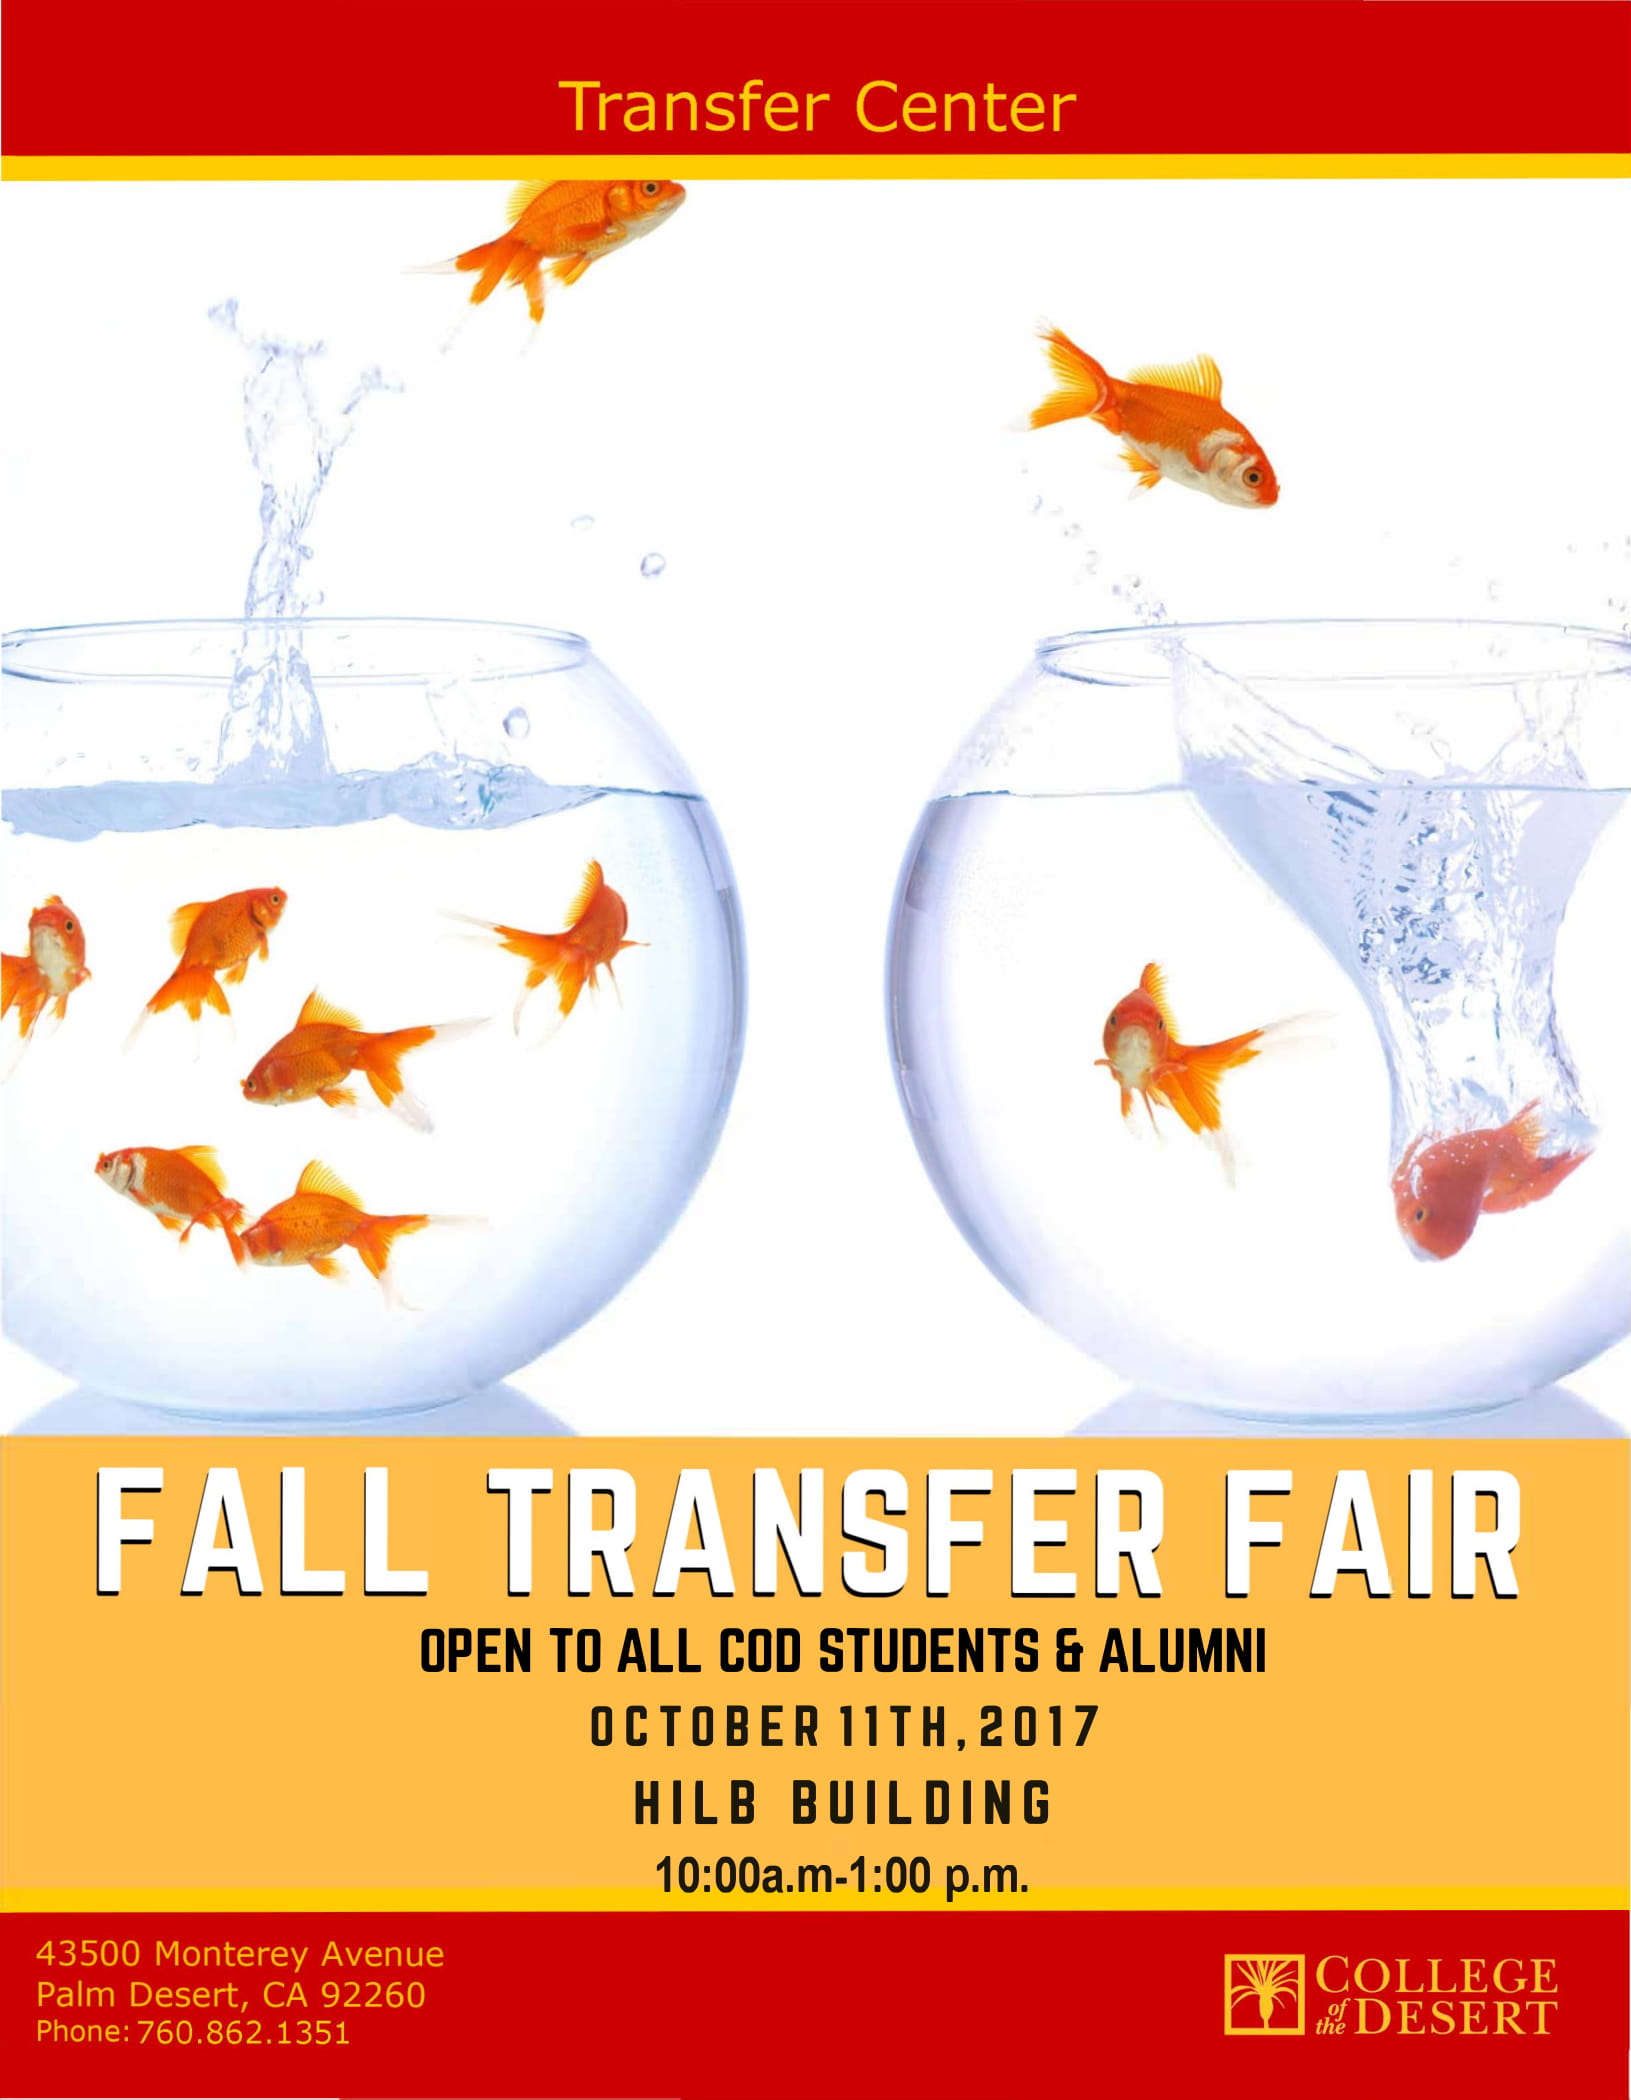 2017 Fall Transfer Fair on Wednesday, October 11, 2017 from 10am to 1pm in the Hilb Building